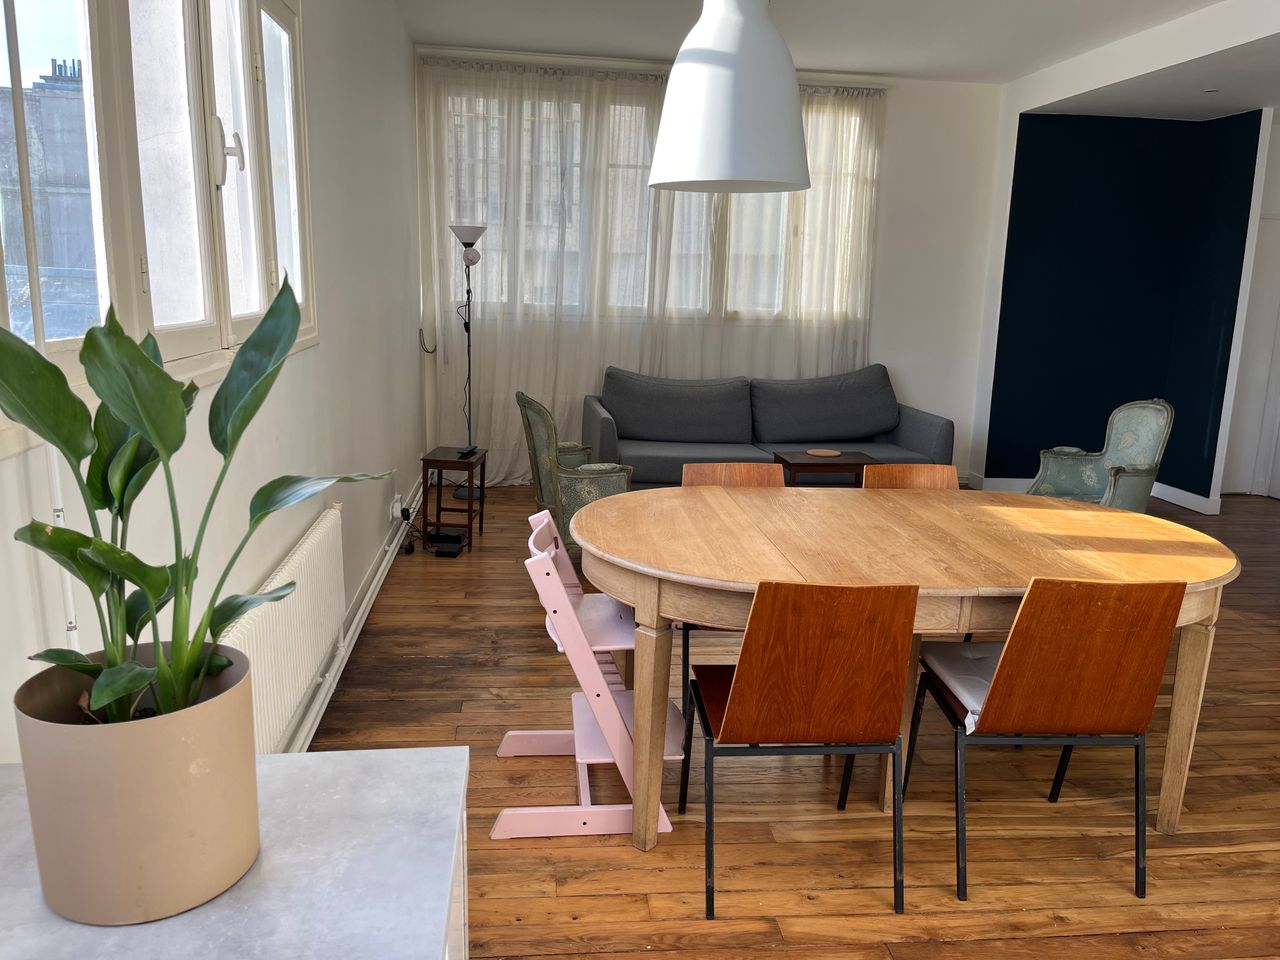 Space, light, view, in 2 bedroom Marais + parking. Rental open for companies only.